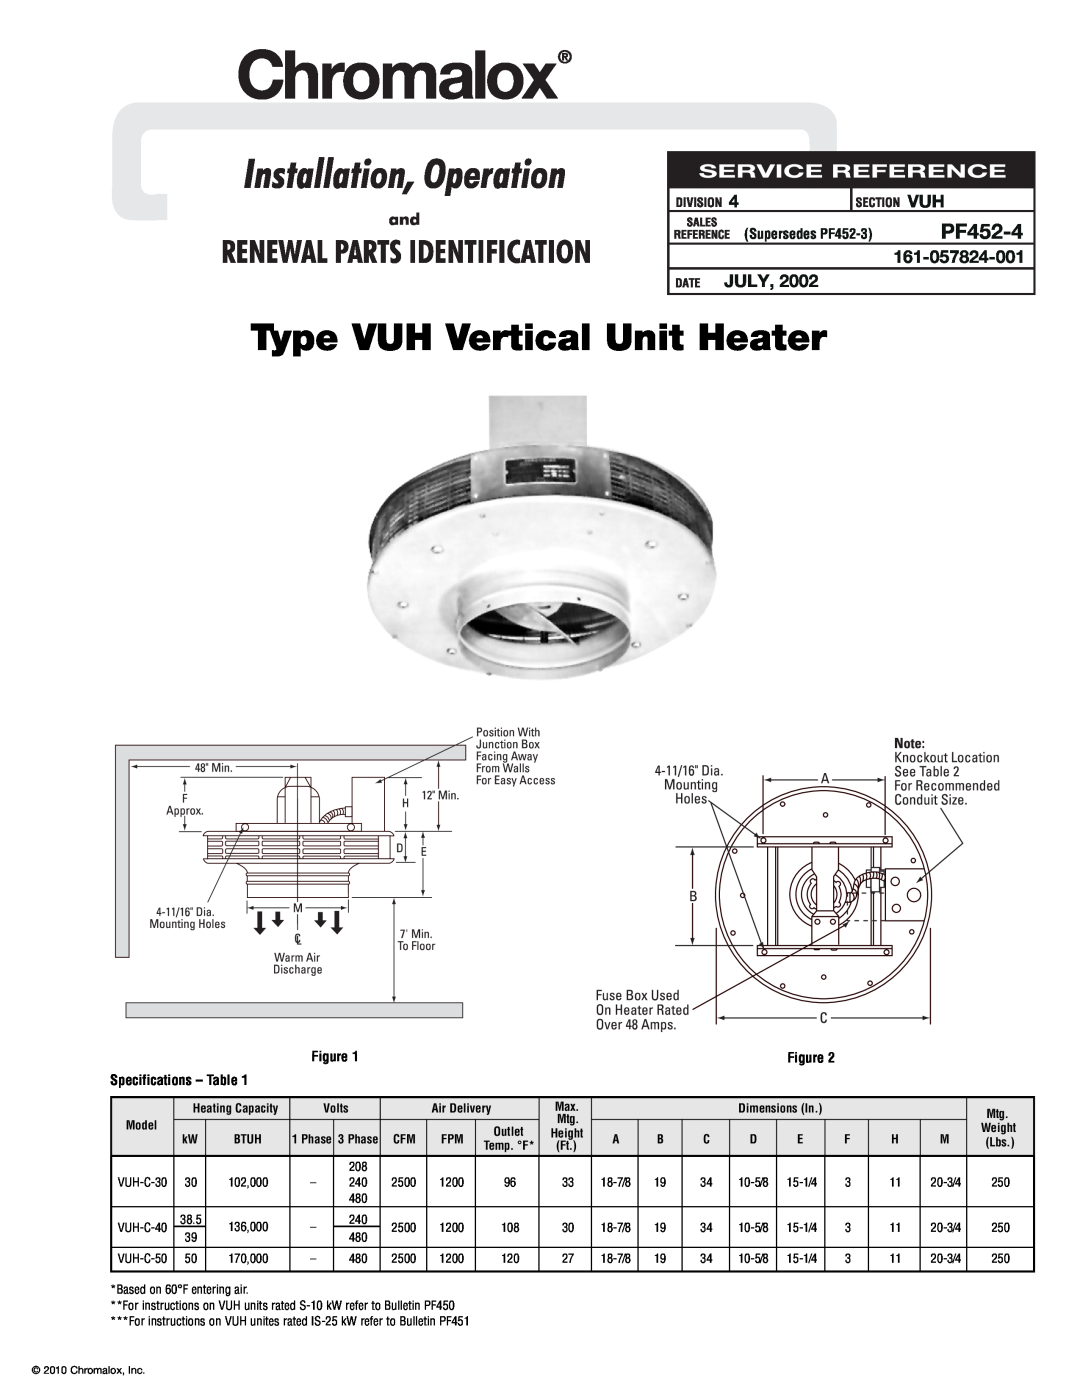 Chromalox PF452-4 specifications July, Type VUH Vertical Unit Heater, Specifications - Table 